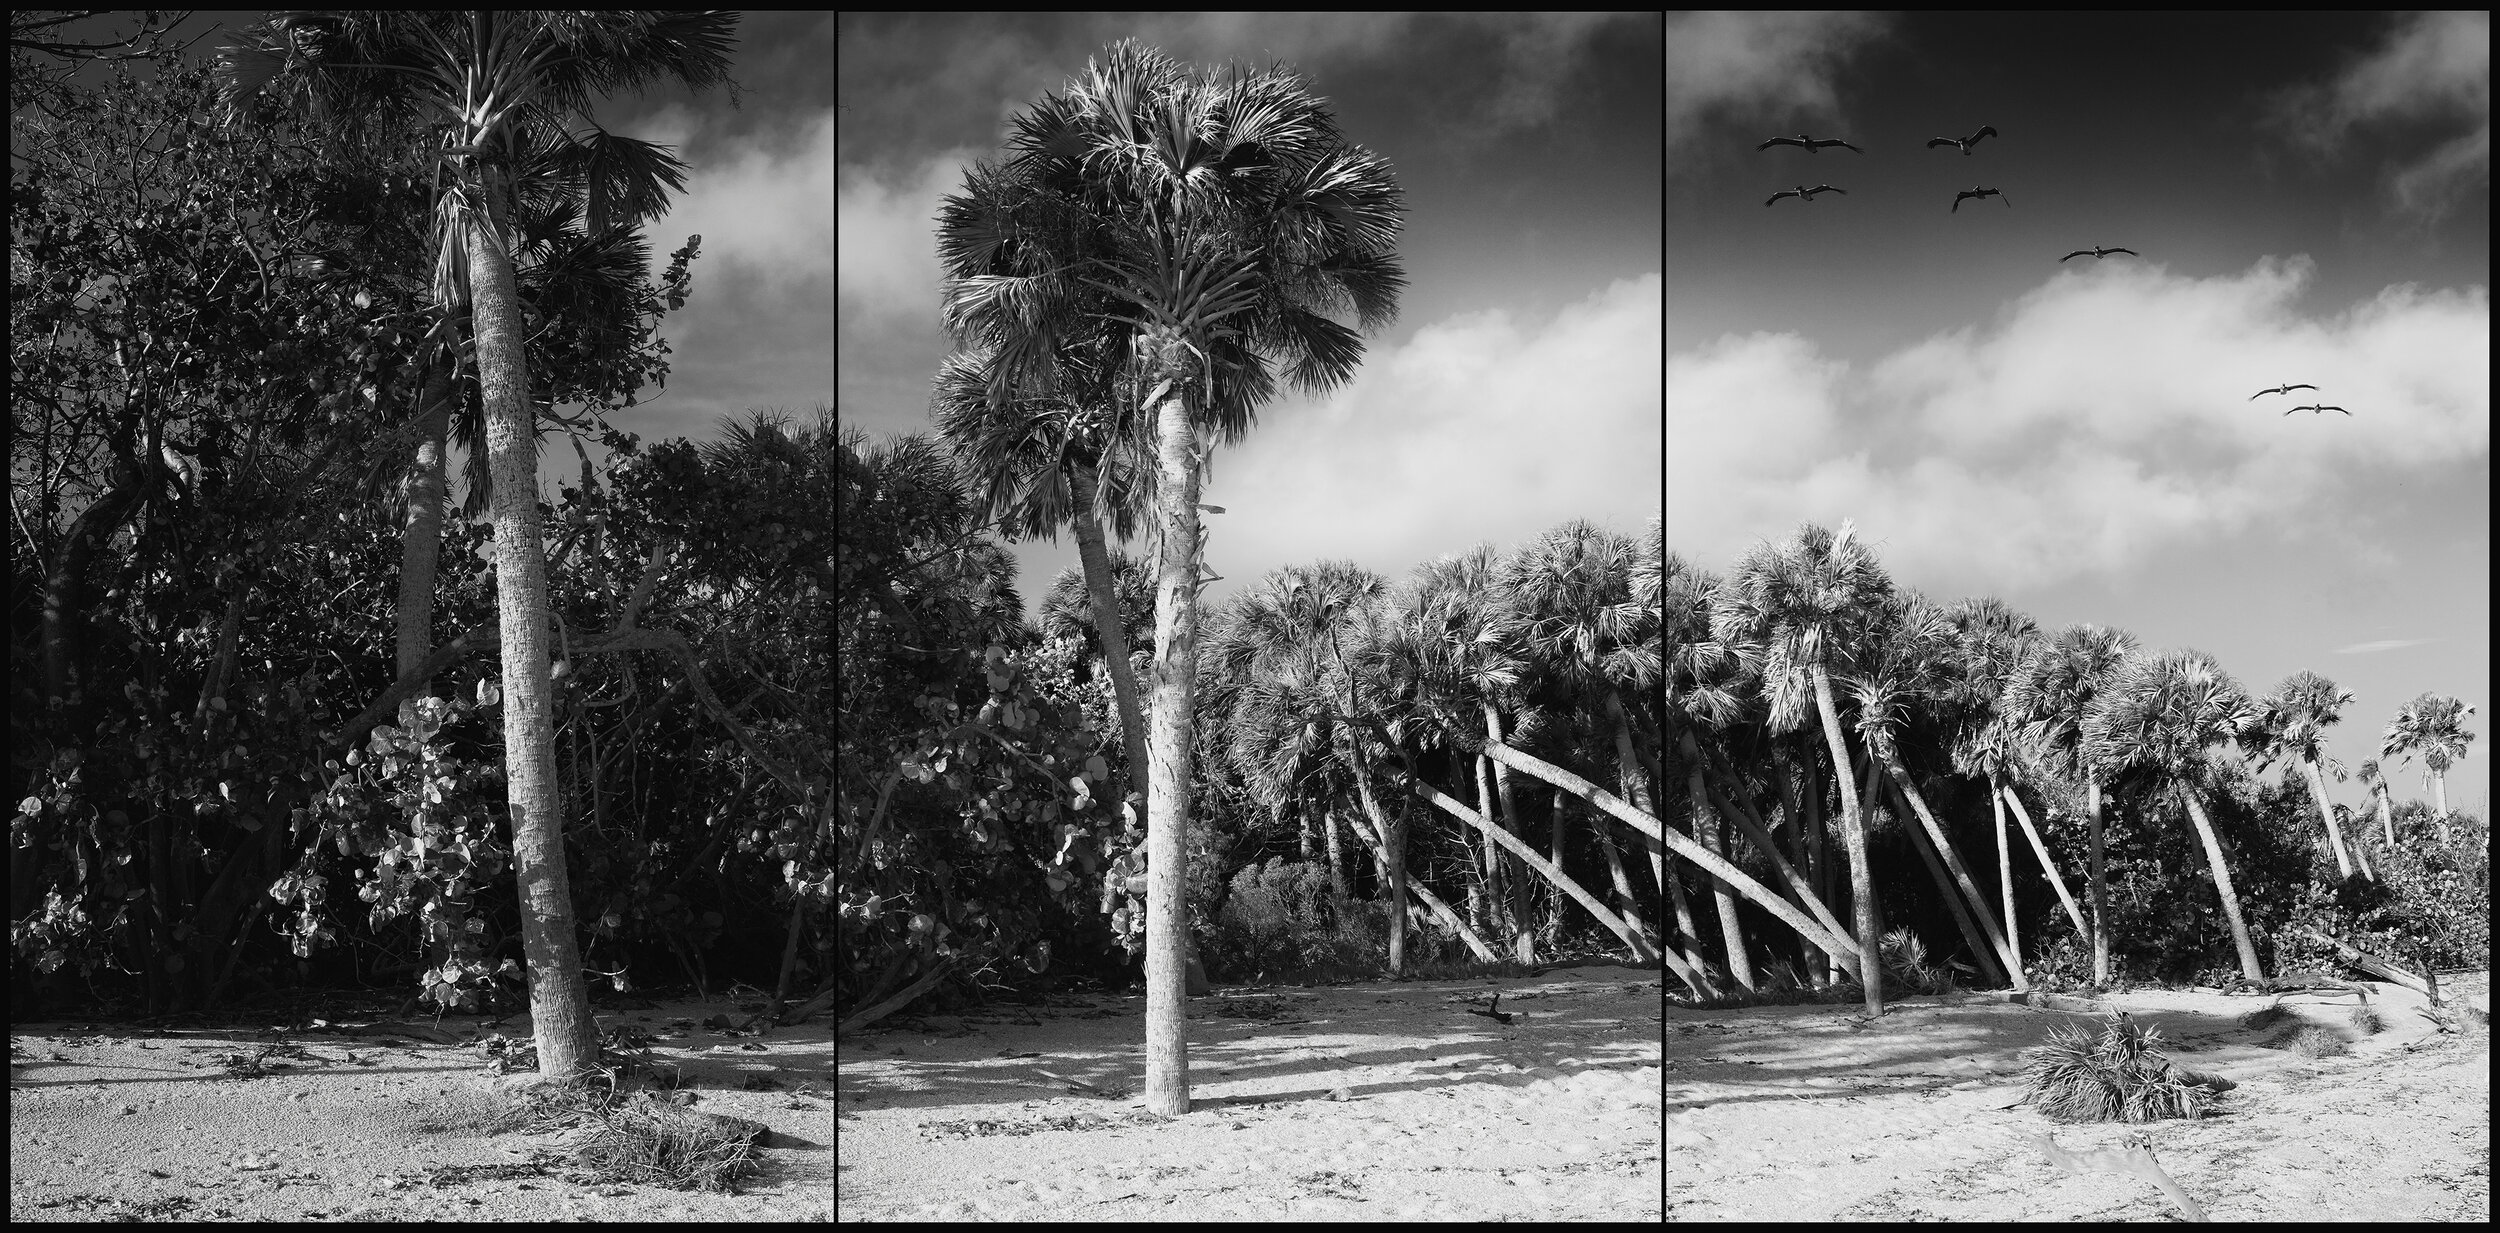  Barrier Island, Observations,  study no. 8 